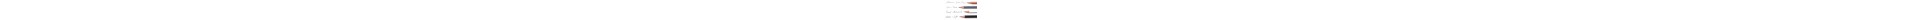 Crayon Palomino - Blackwing - Bout gomme rechargeable 